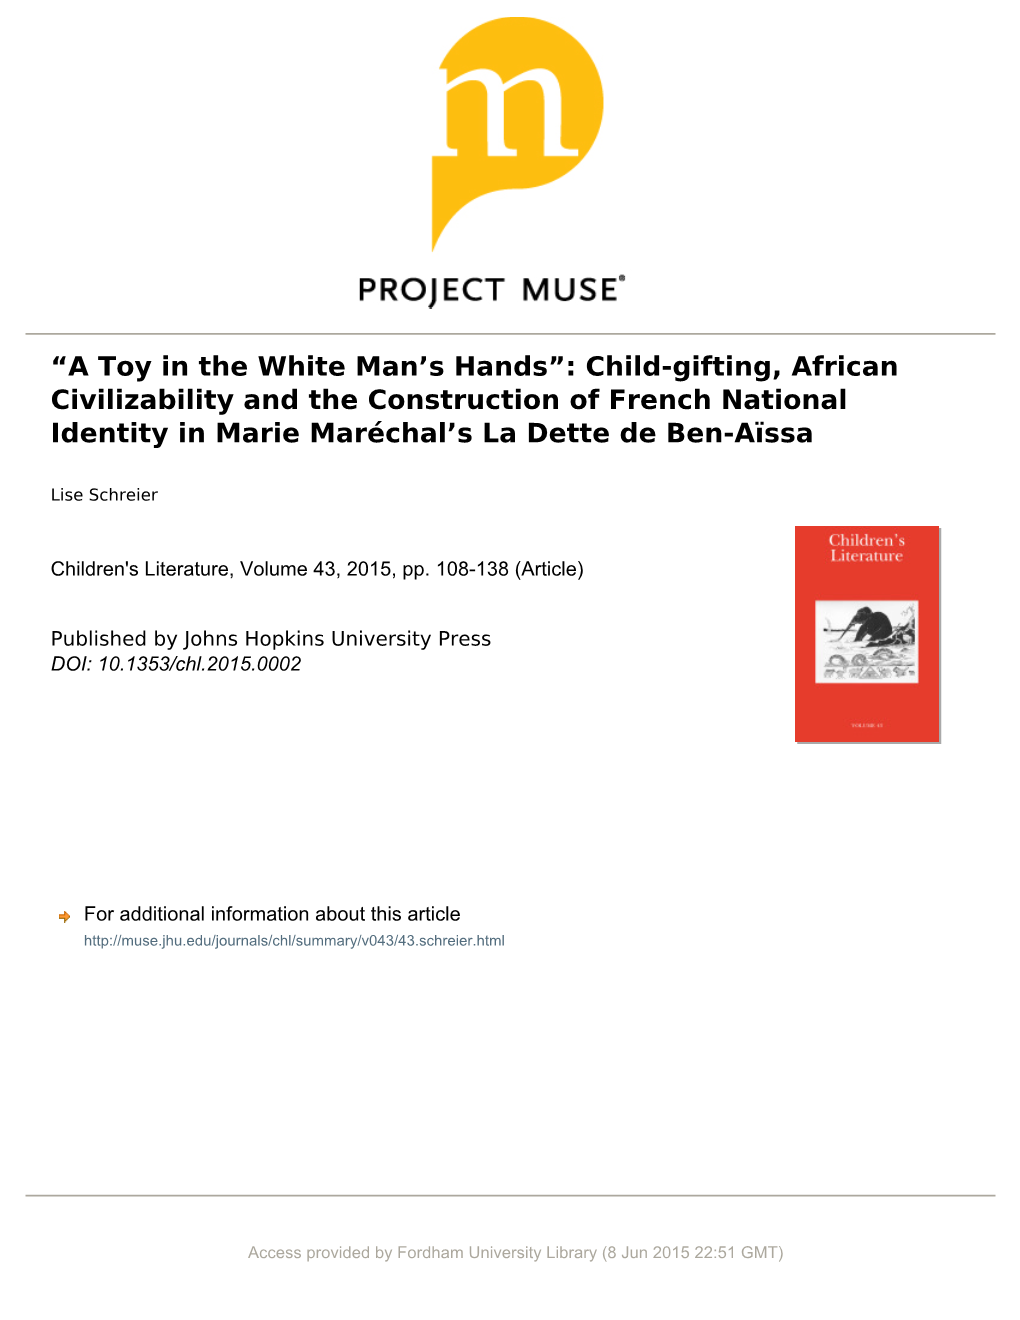 “A Toy in the White Manʼs Hands”: Child-Gifting, African Civilizability and the Construction of French National Identity In